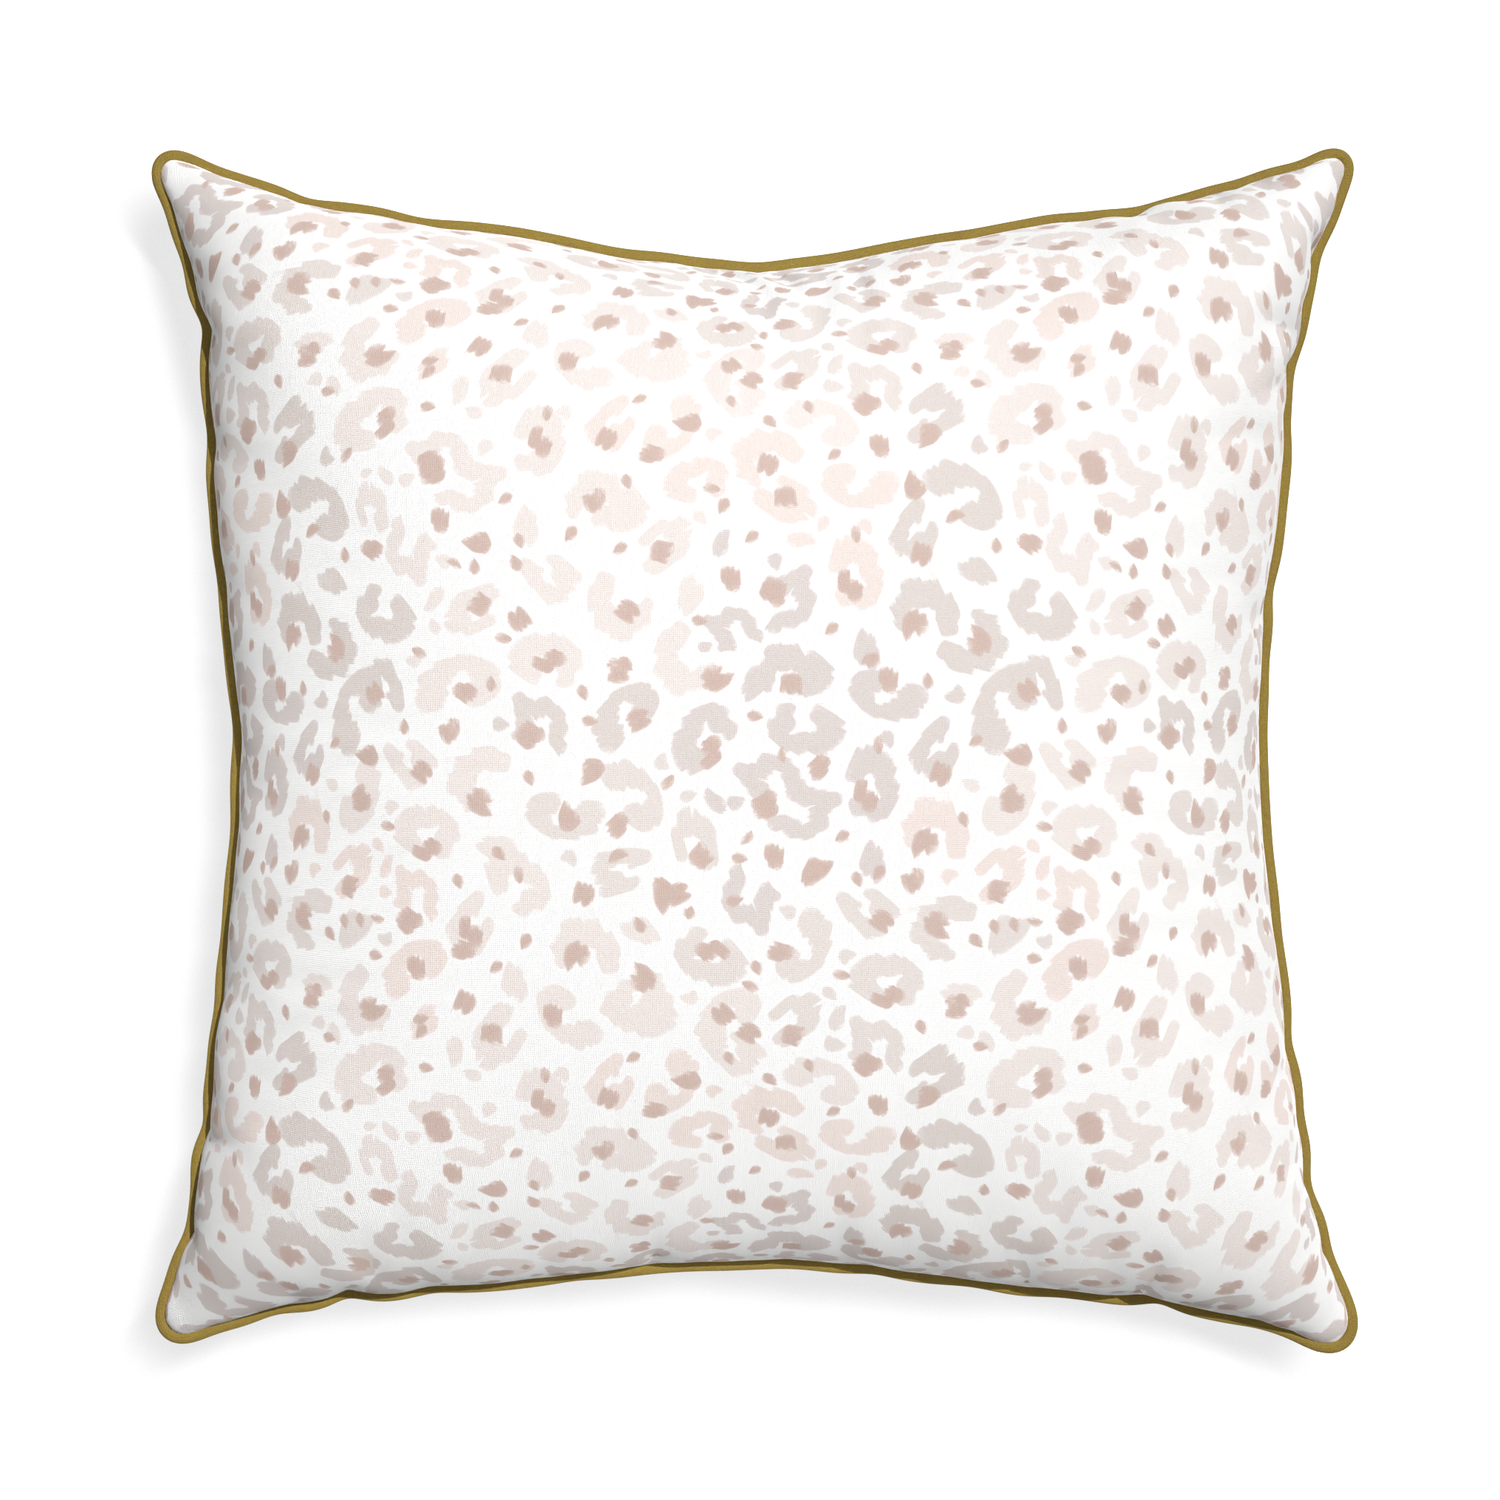 Euro-sham rosie custom beige animal printpillow with c piping on white background